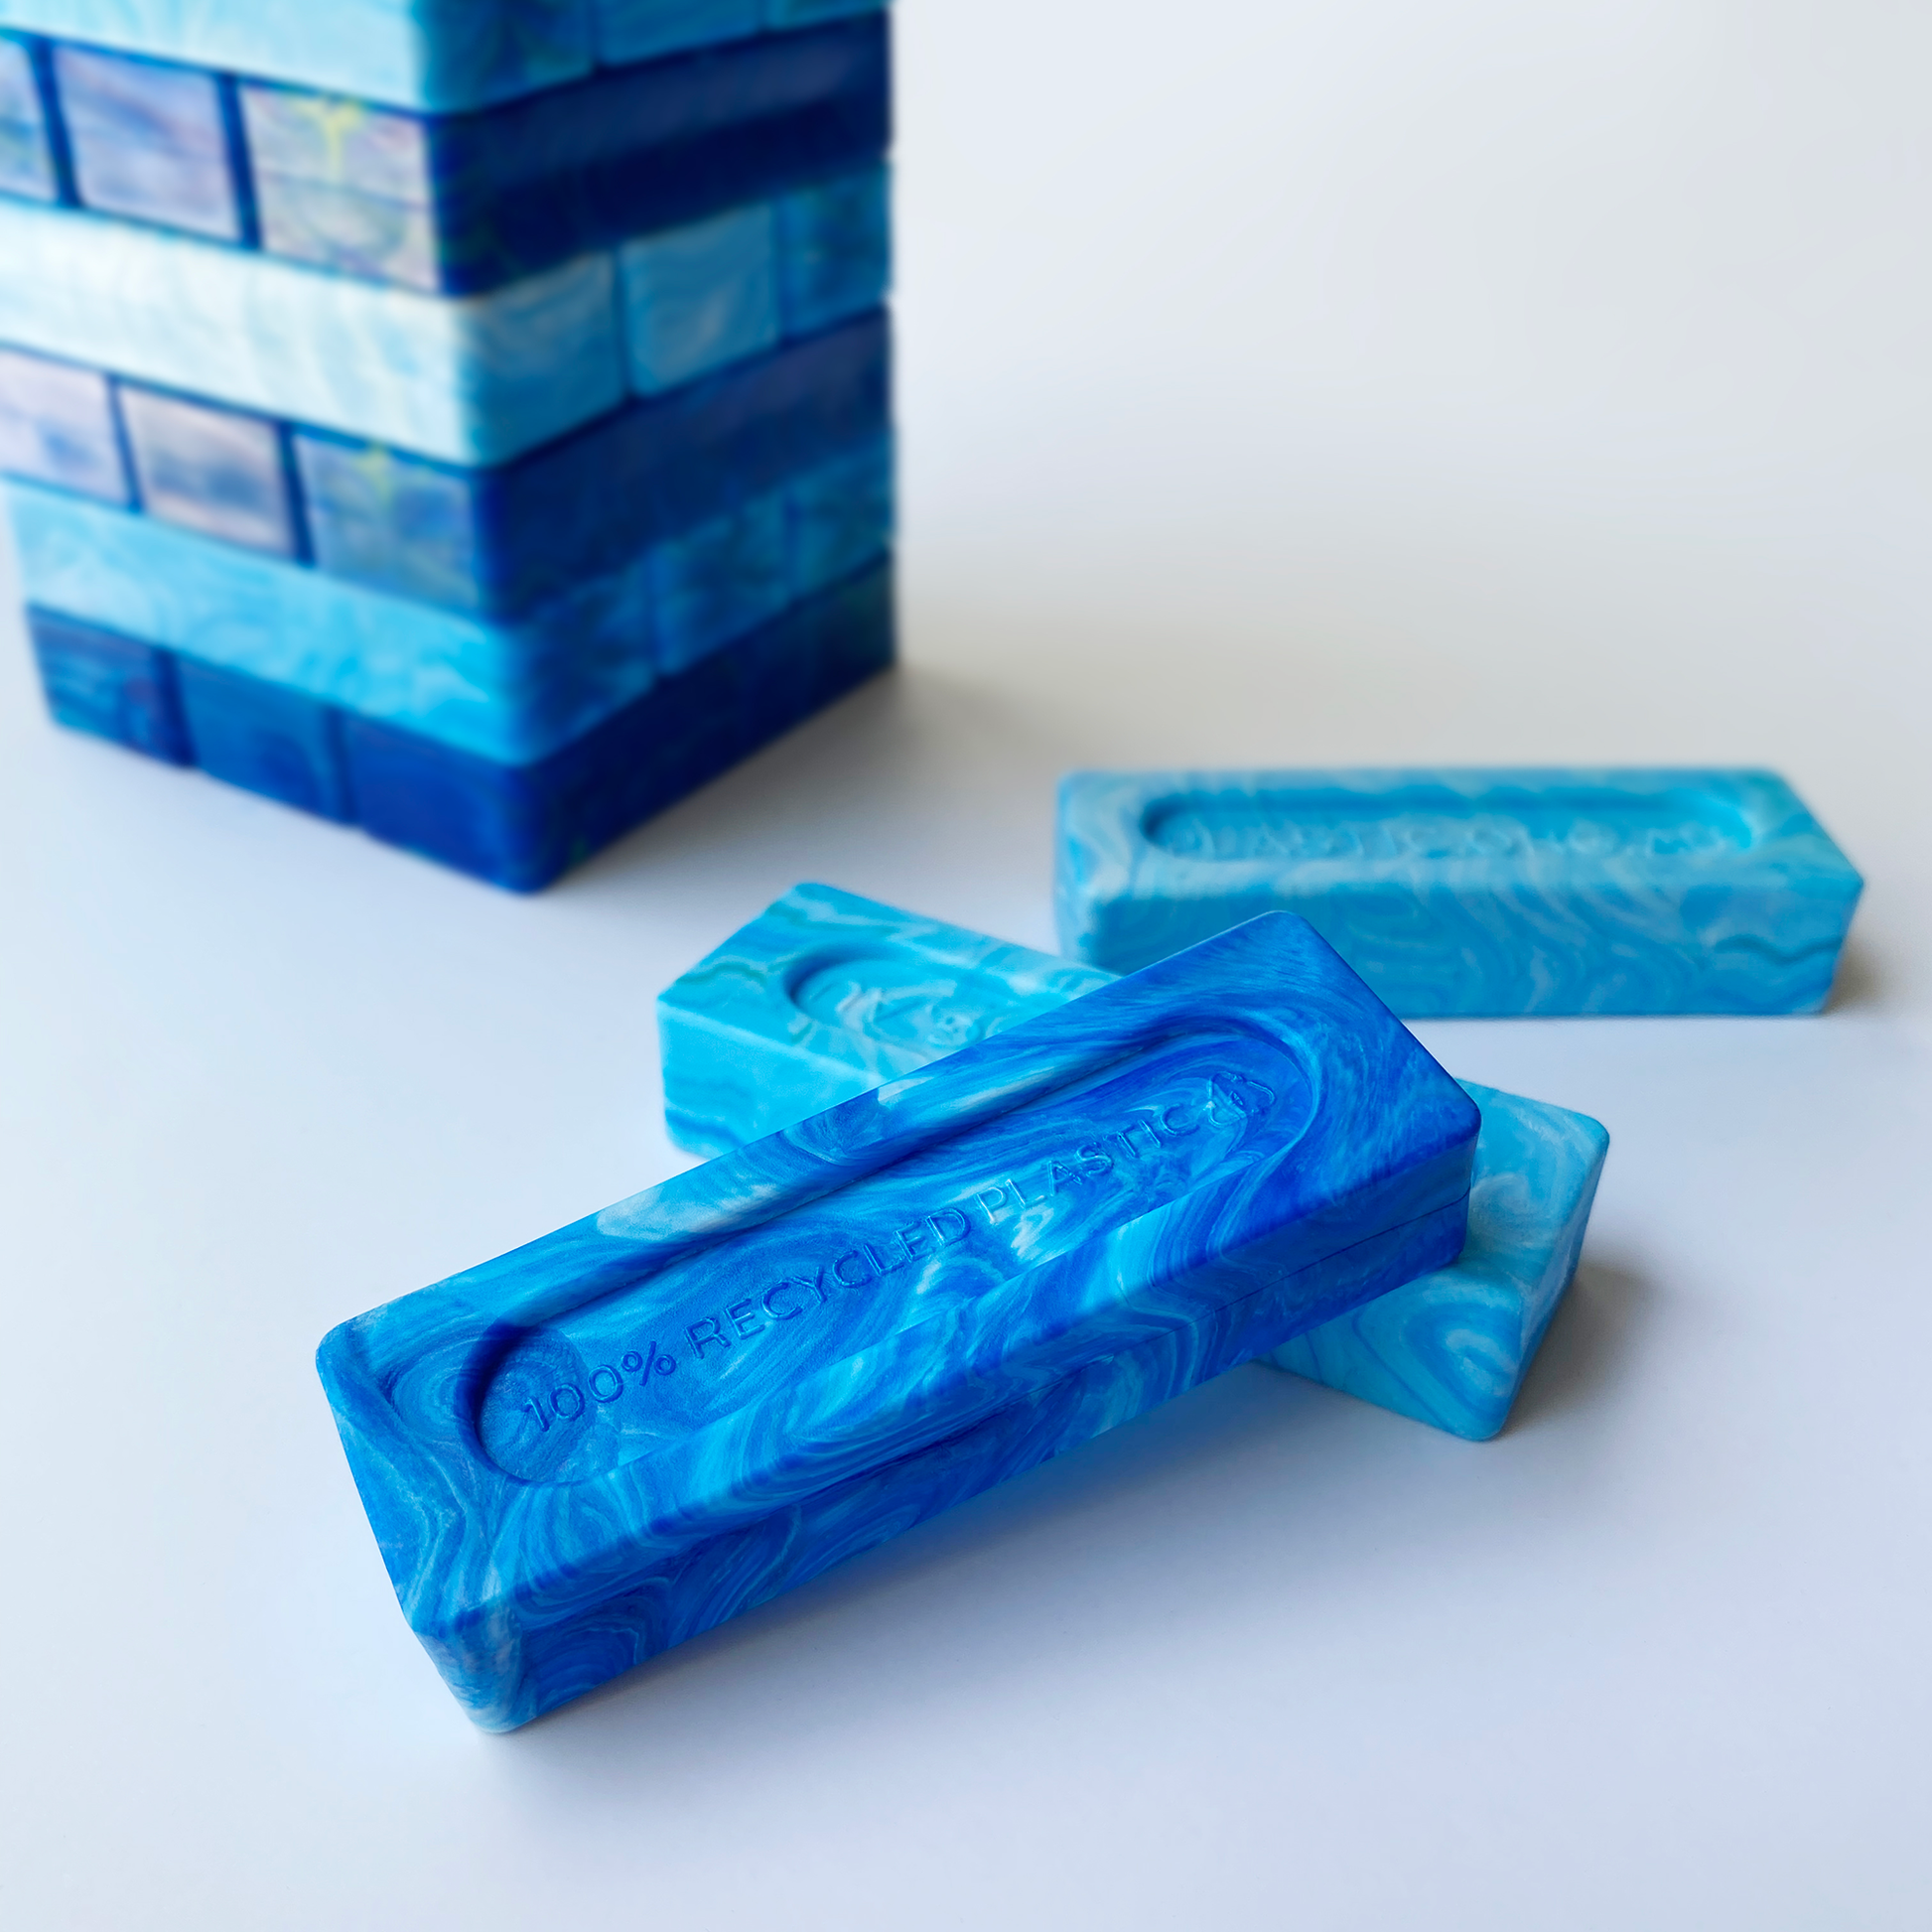 100% recycled, sustainable jumbling tower set | Precious Plastic Melbourne, Australia